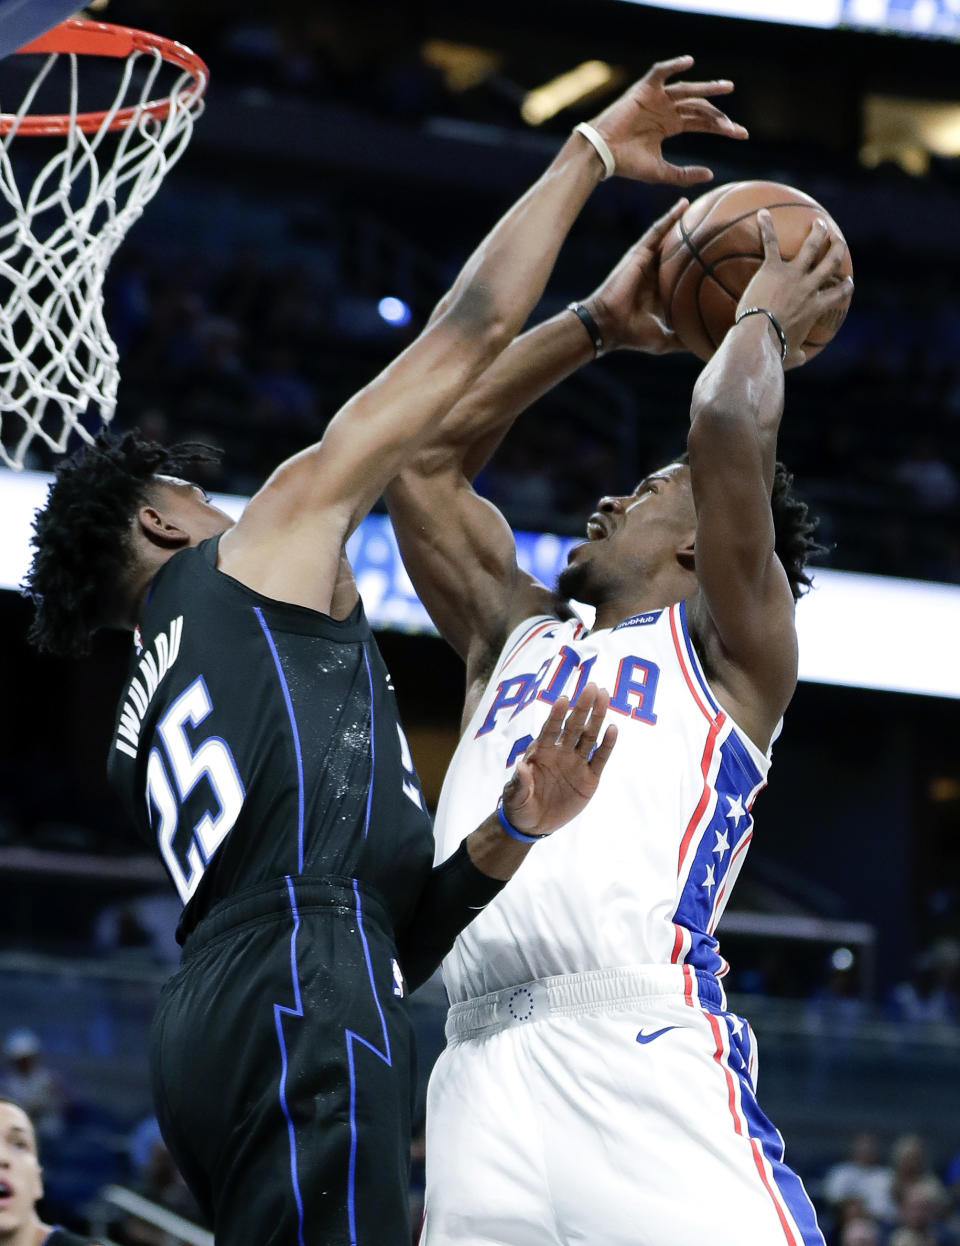 Philadelphia 76ers' Jimmy Butler, right, makes a shot against Orlando Magic's Wesley Iwundu (25) during the first half of an NBA basketball game Wednesday, Nov. 14, 2018, in Orlando, Fla. (AP Photo/John Raoux)